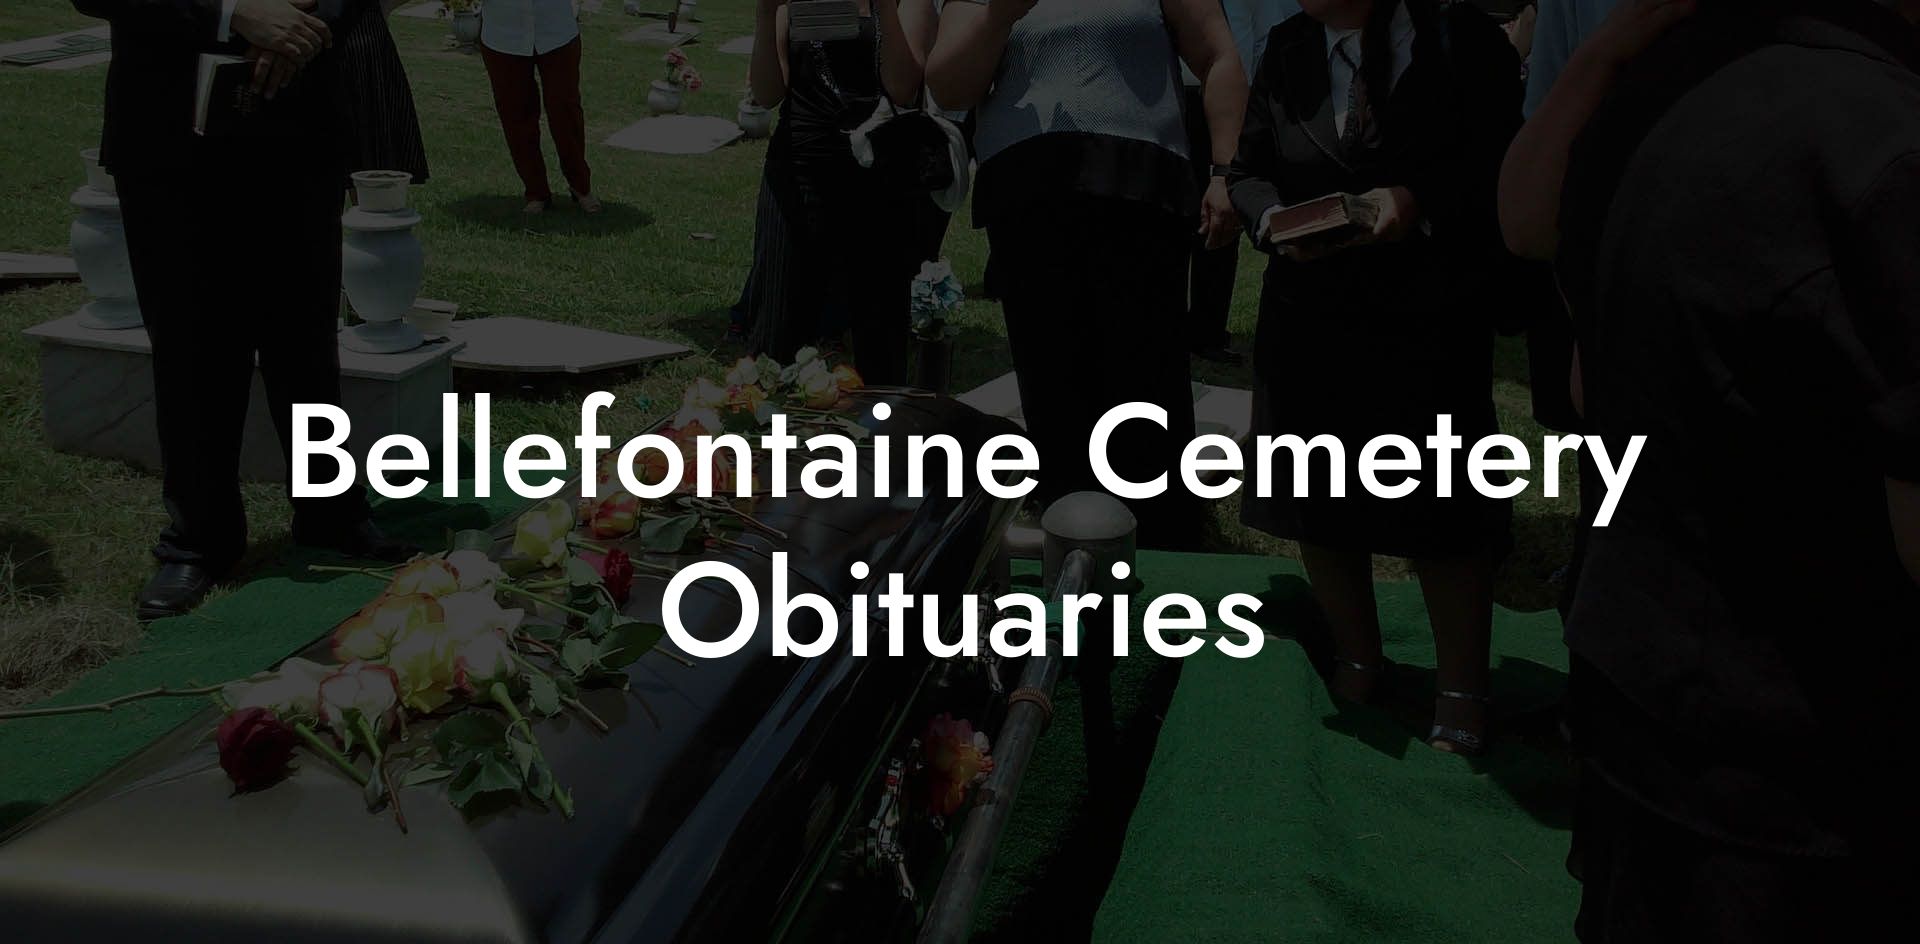 Bellefontaine Cemetery Obituaries